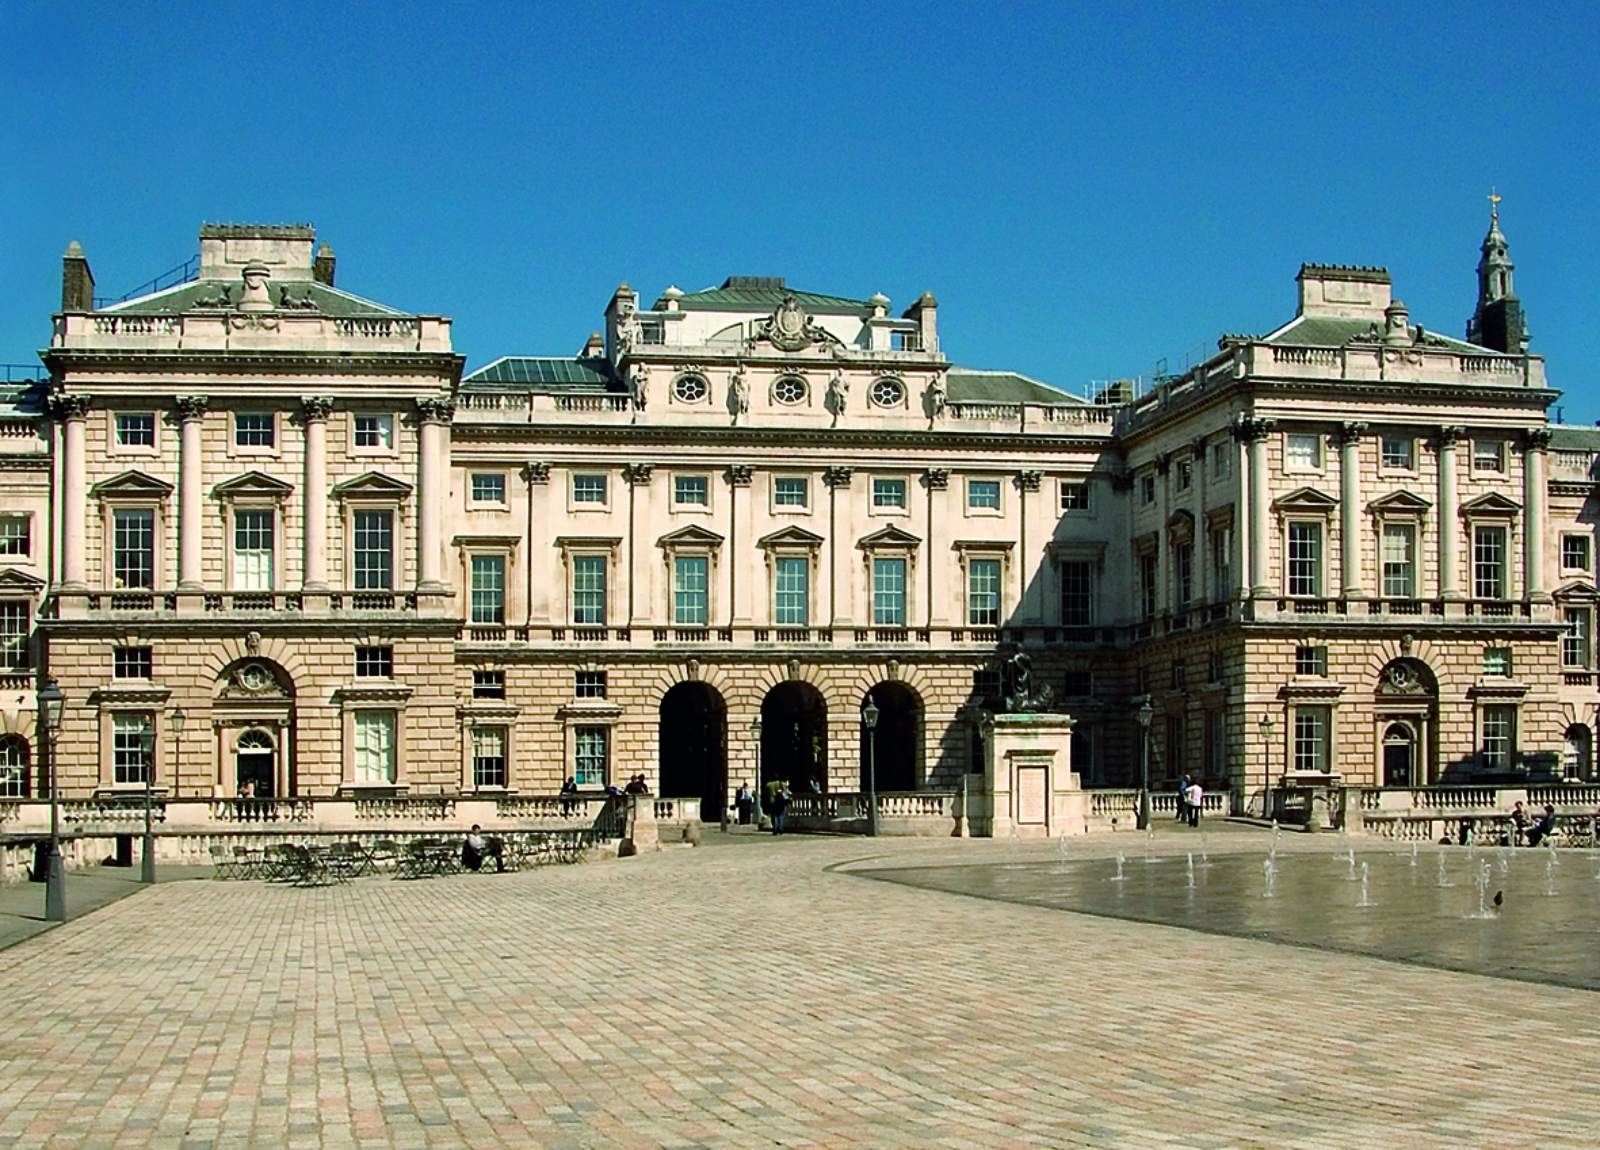 The Courtauld Institute of Art is one of the world's leading centres